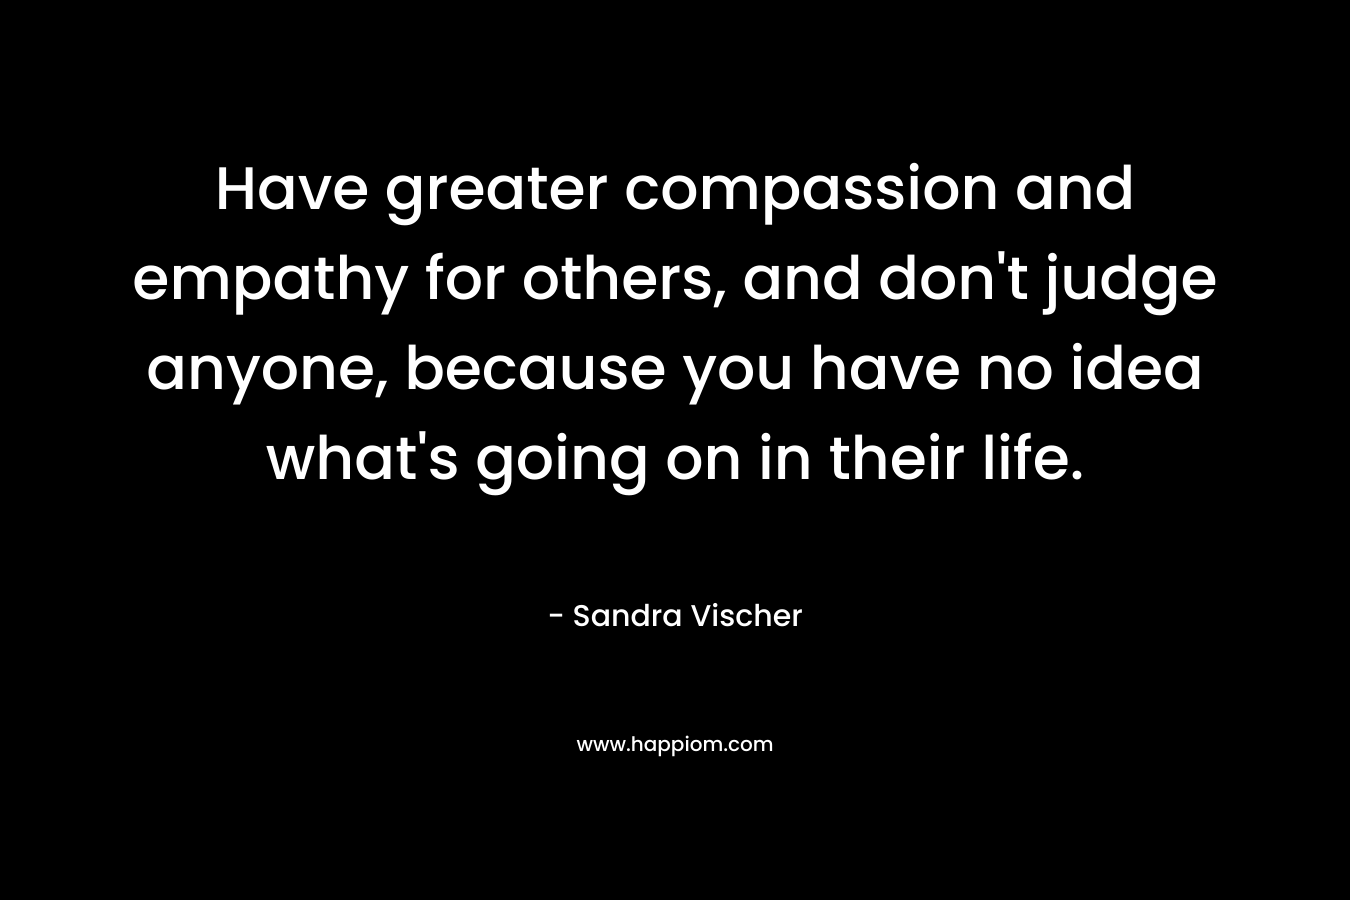 Have greater compassion and empathy for others, and don’t judge anyone, because you have no idea what’s going on in their life. – Sandra Vischer